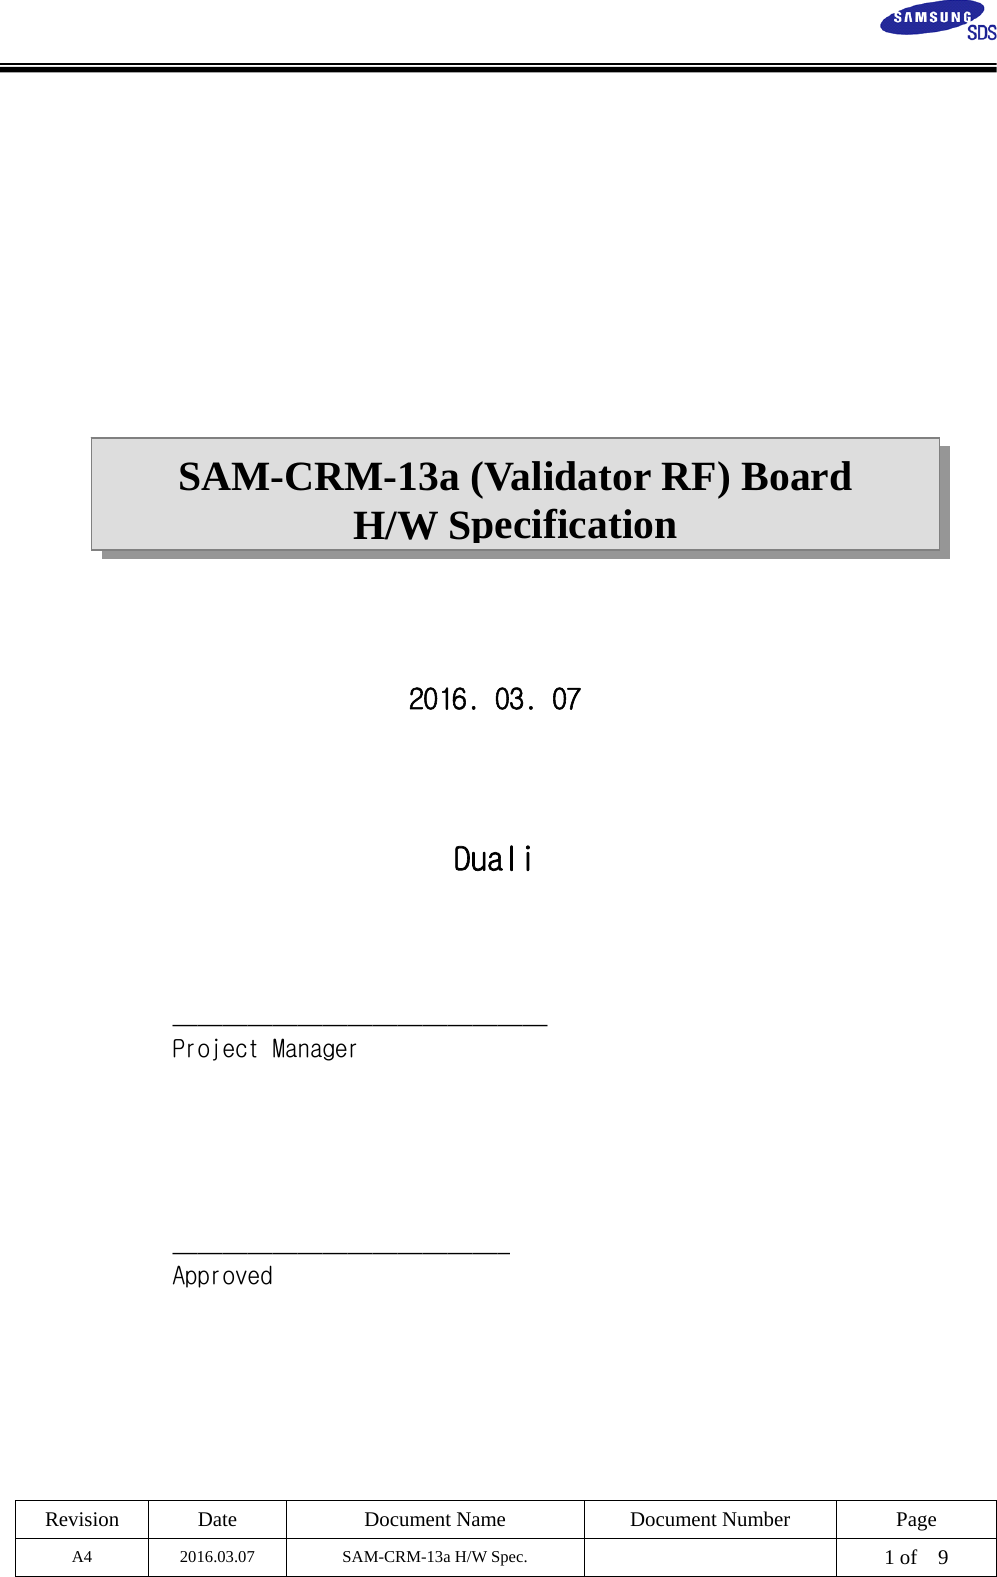  Revision Date  Document Name Document Number Page A4 2016.03.07 SAM-CRM-13a H/W Spec.    1 of    9   SAM-CRM-13a (Validator RF) Board H/W Specification                  2016. 03. 07     Duali     ______________________________   Project Manager      ___________________________ Approved   